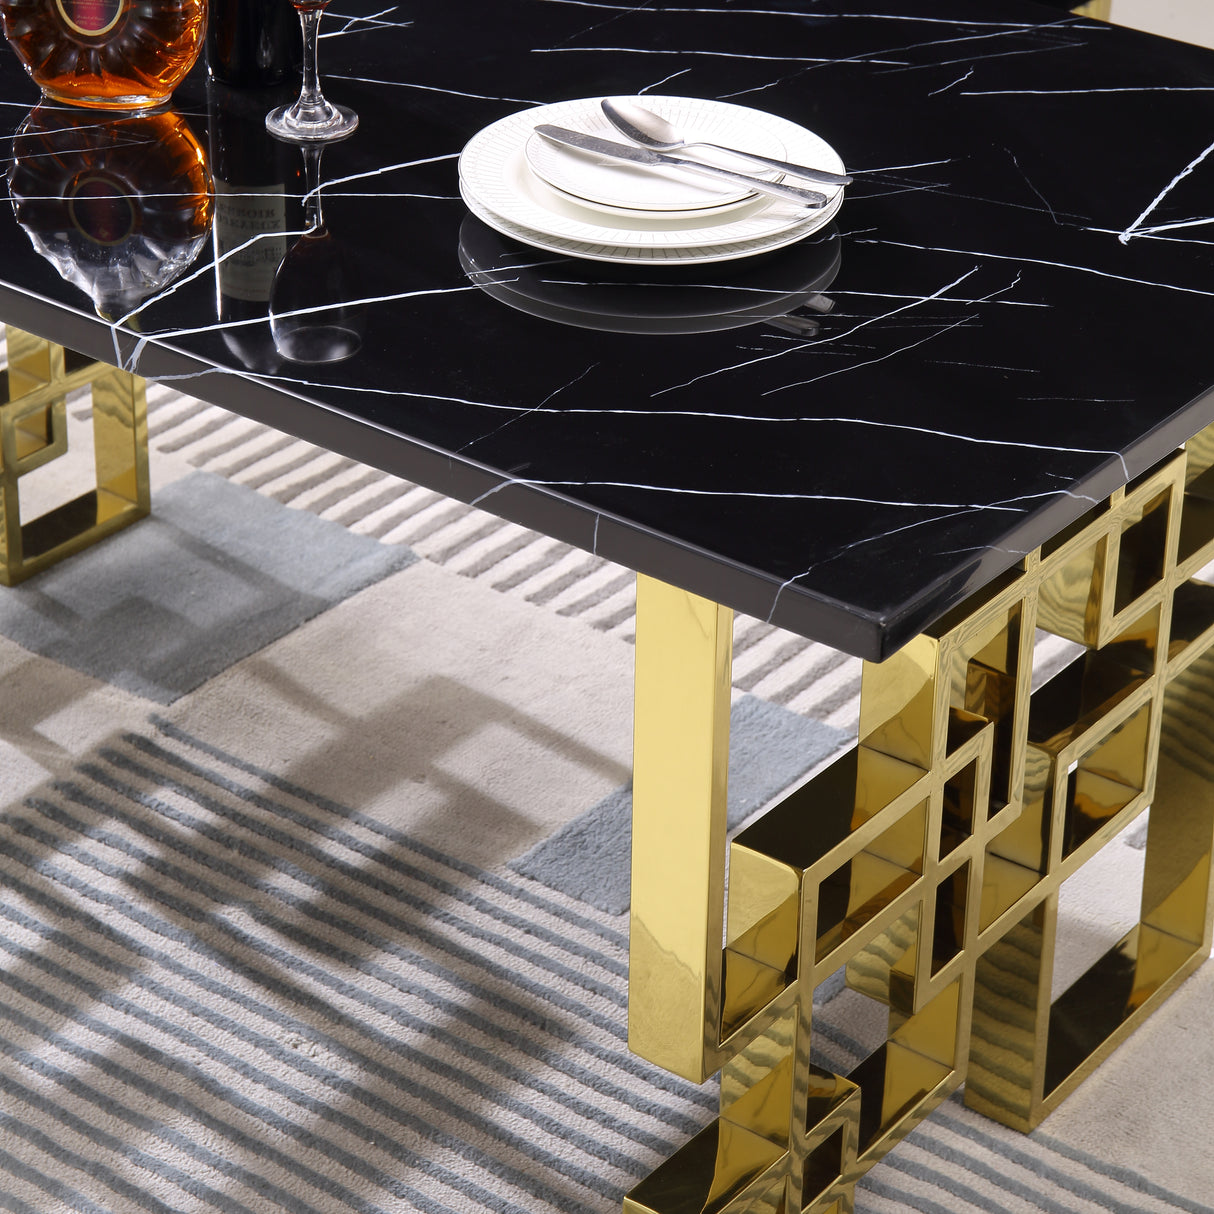 Contemporary Rectangular Marble Table, 0.71" Marble Top, Gold Mirrored Finish, Luxury Design For Home (63"x35.4"x29.5") - Home Elegance USA